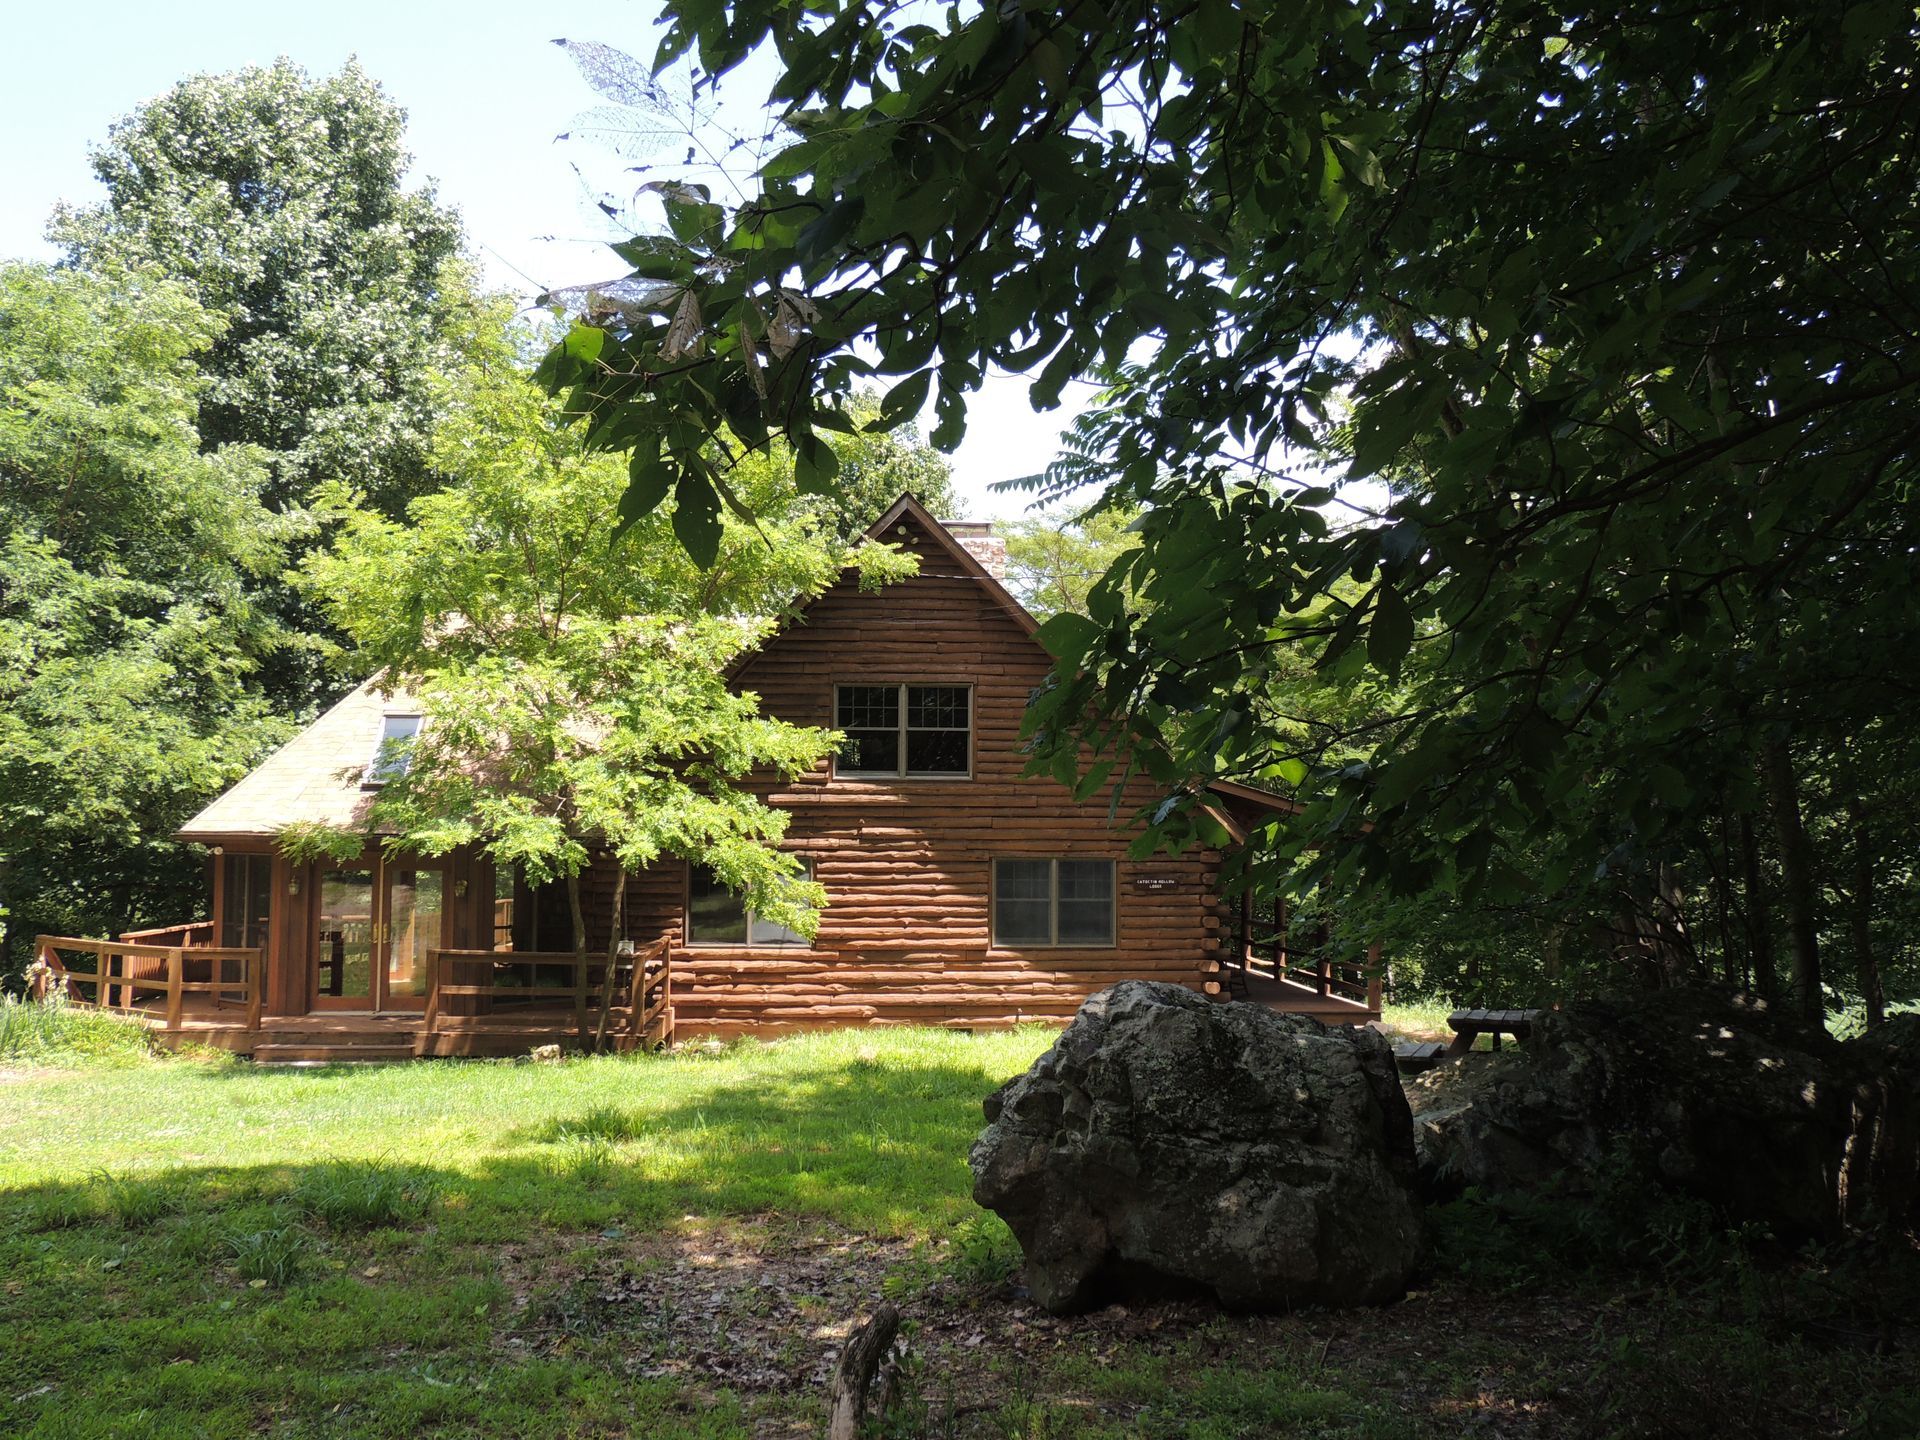 Thr front view of Catoctin Hollow Lodge shows a wooden porch and is surrounded by trees.